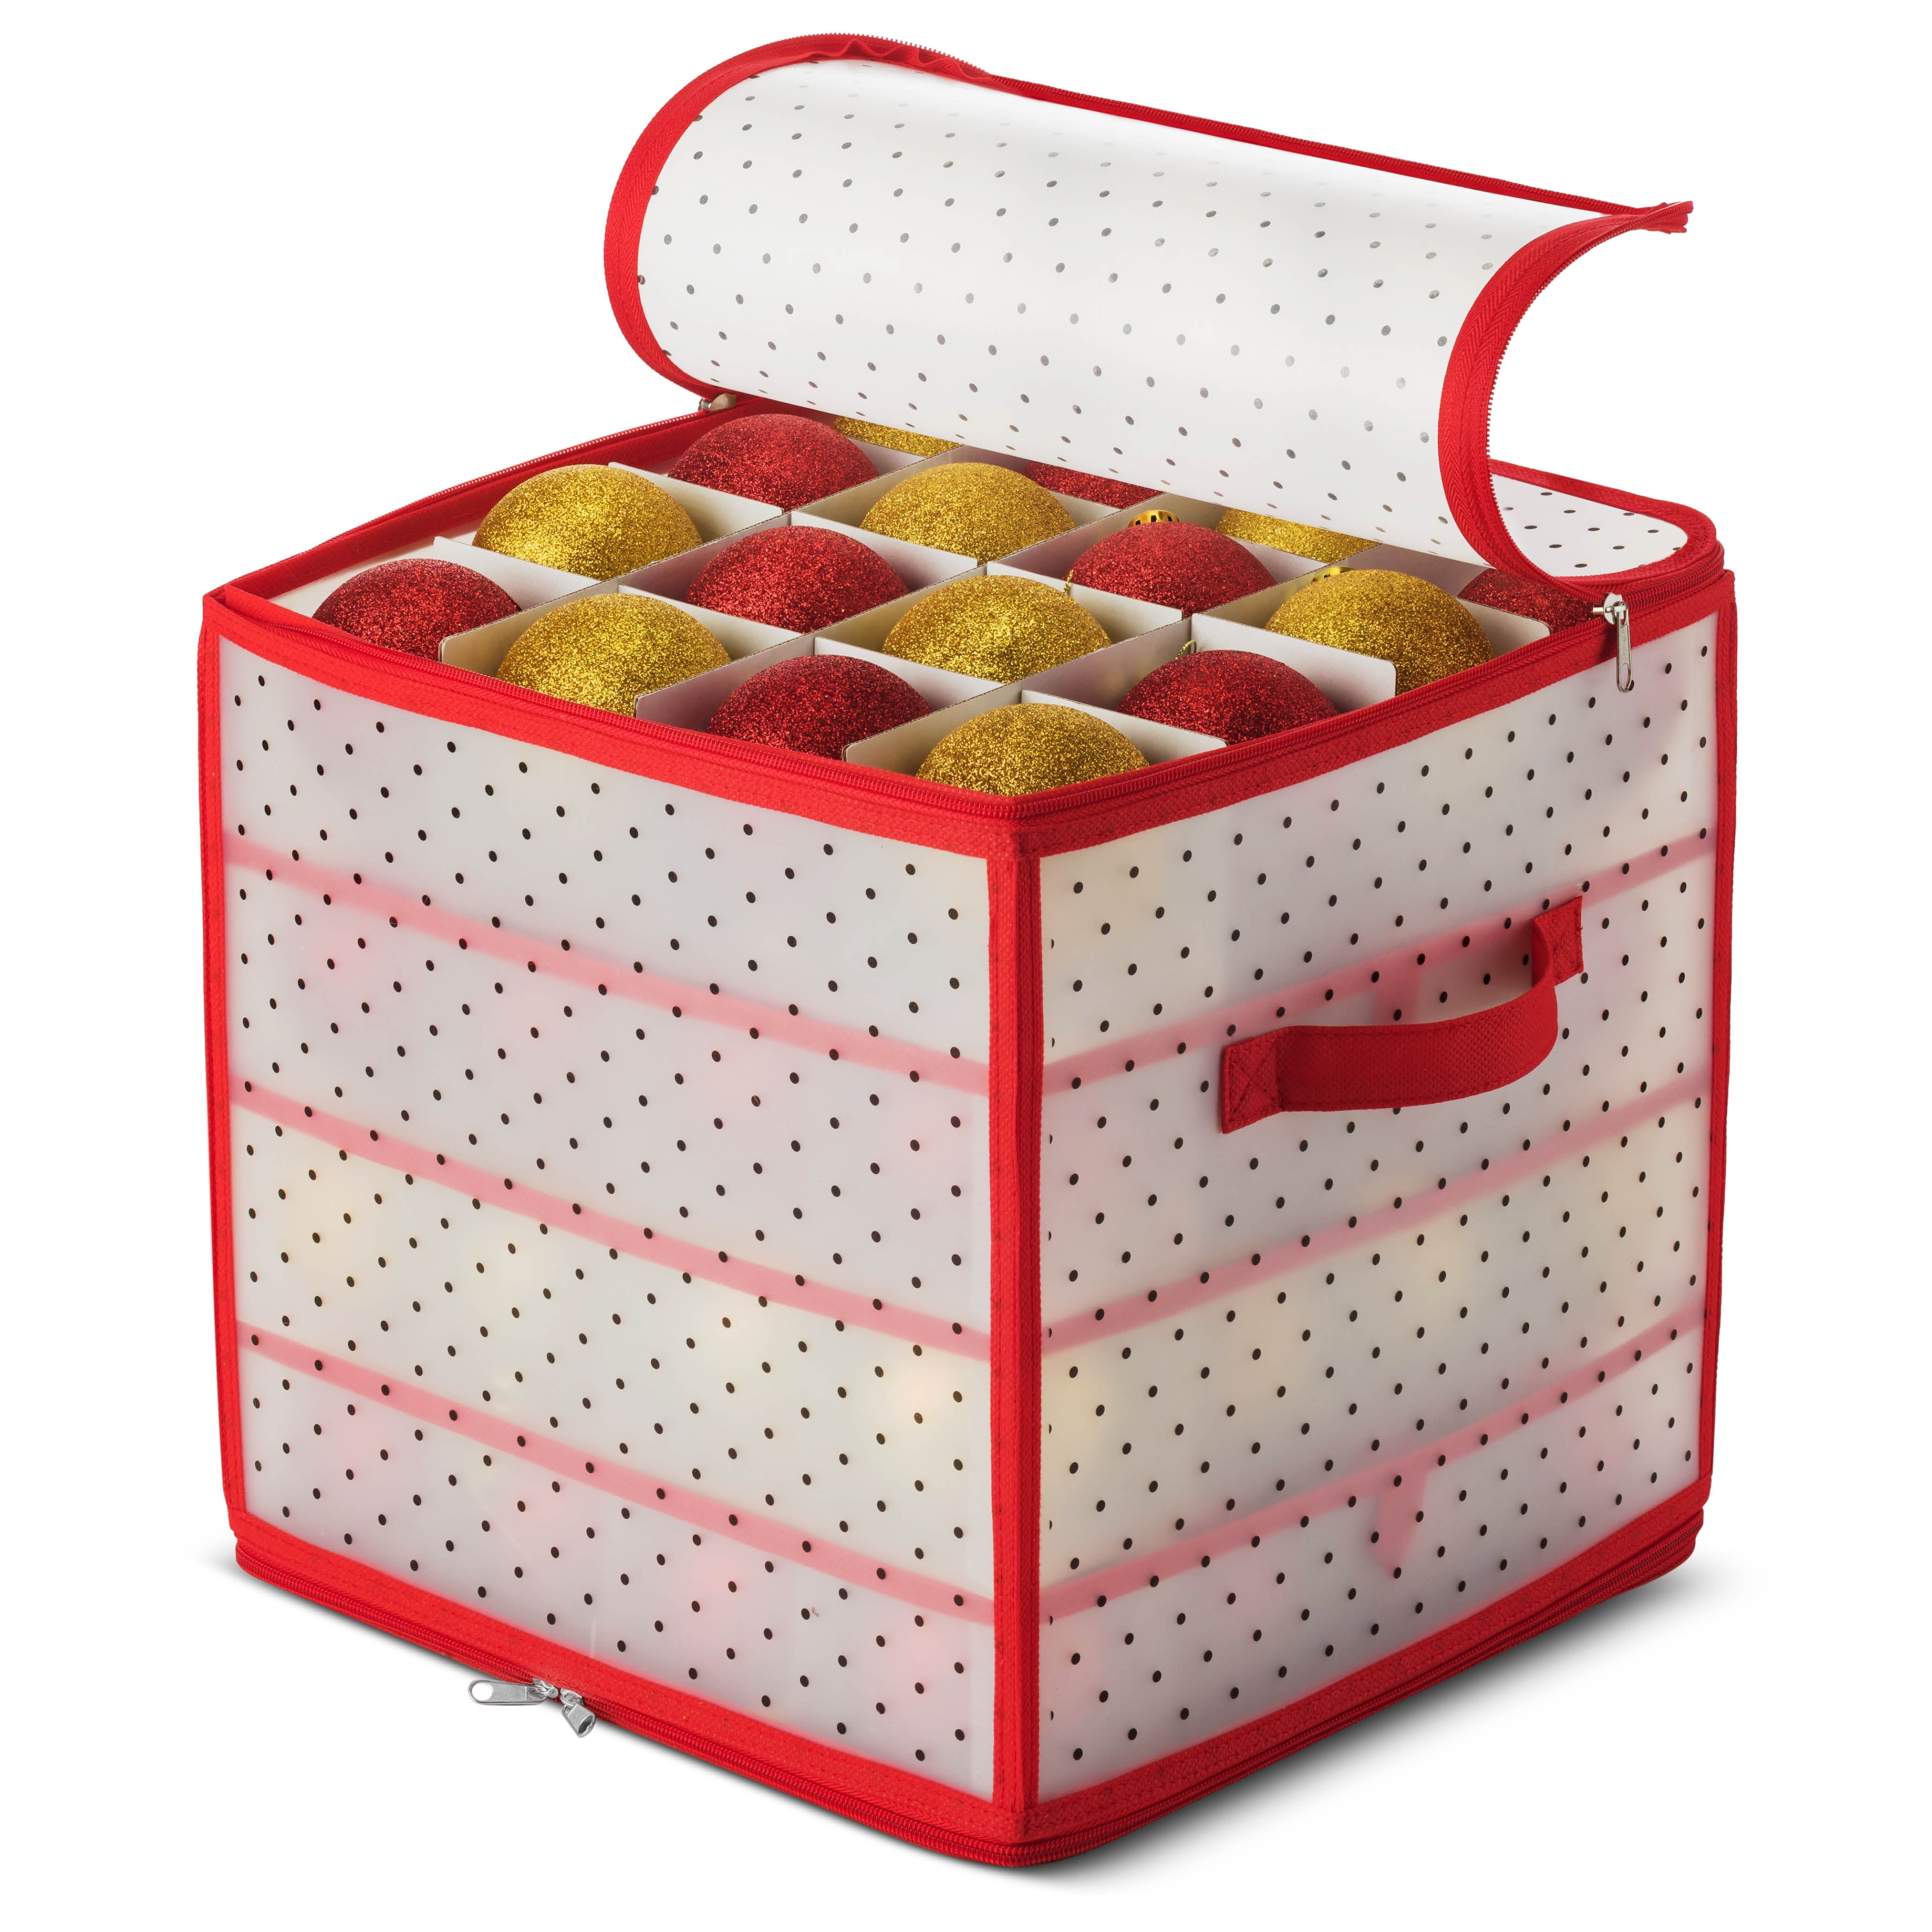 Plastic Christmas Ornament Storage Box Large with 2 Sided Dual Zipper  Closure - Keeps 128 Holiday Ornaments, Xmas Decorations Accessories, 3  Compartments - Sturdy Flexible Plastic 